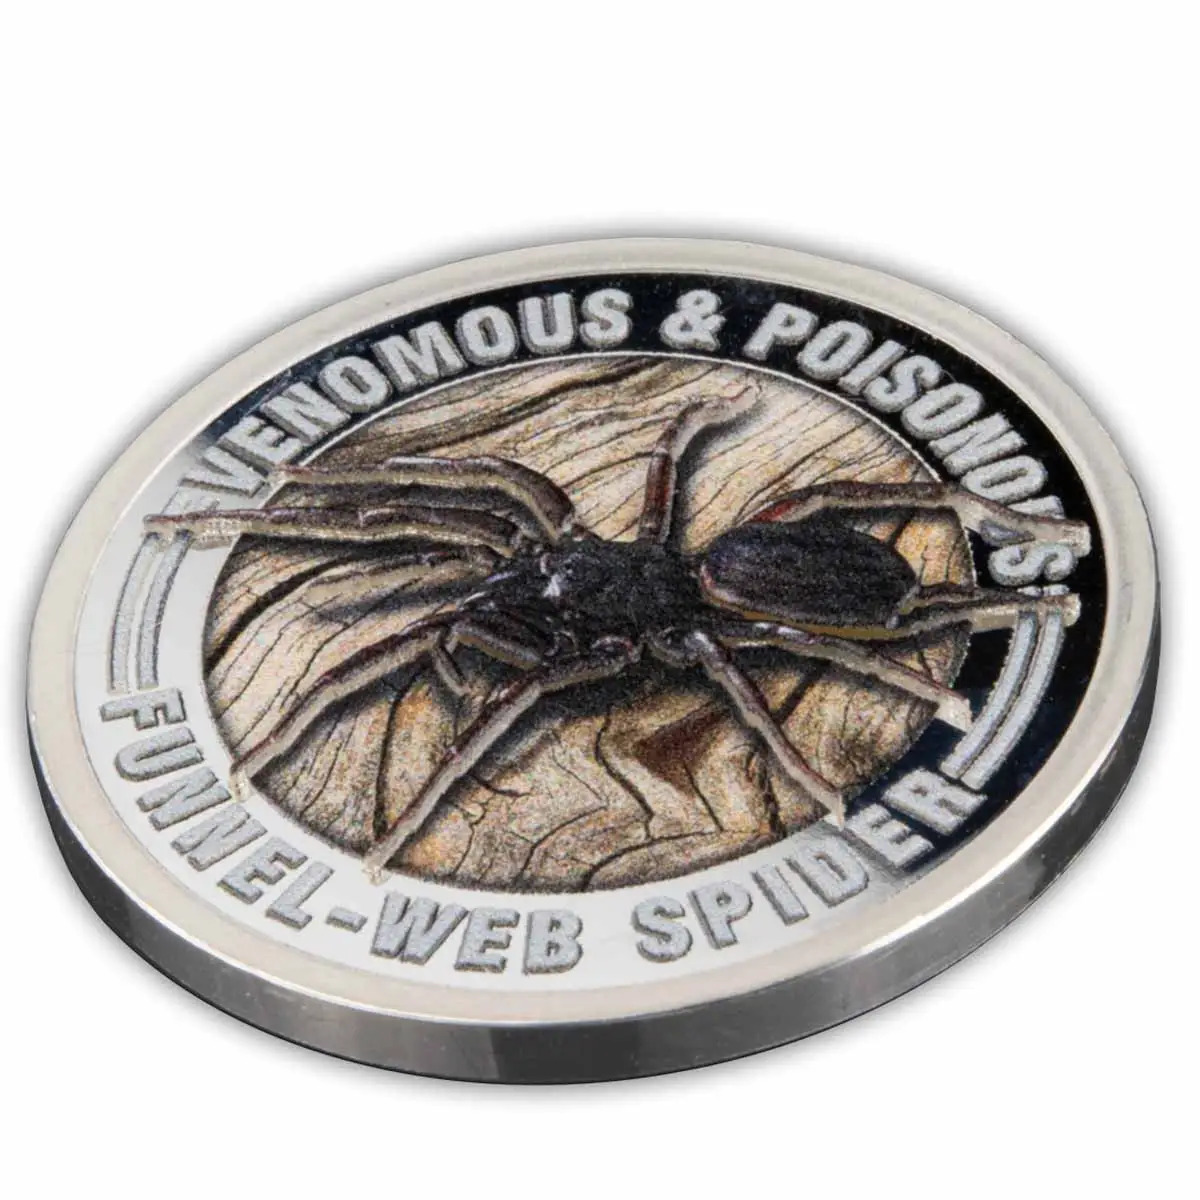 2022 $1 Funnel-Web Spider 1/2oz Silver Prooflike Coin